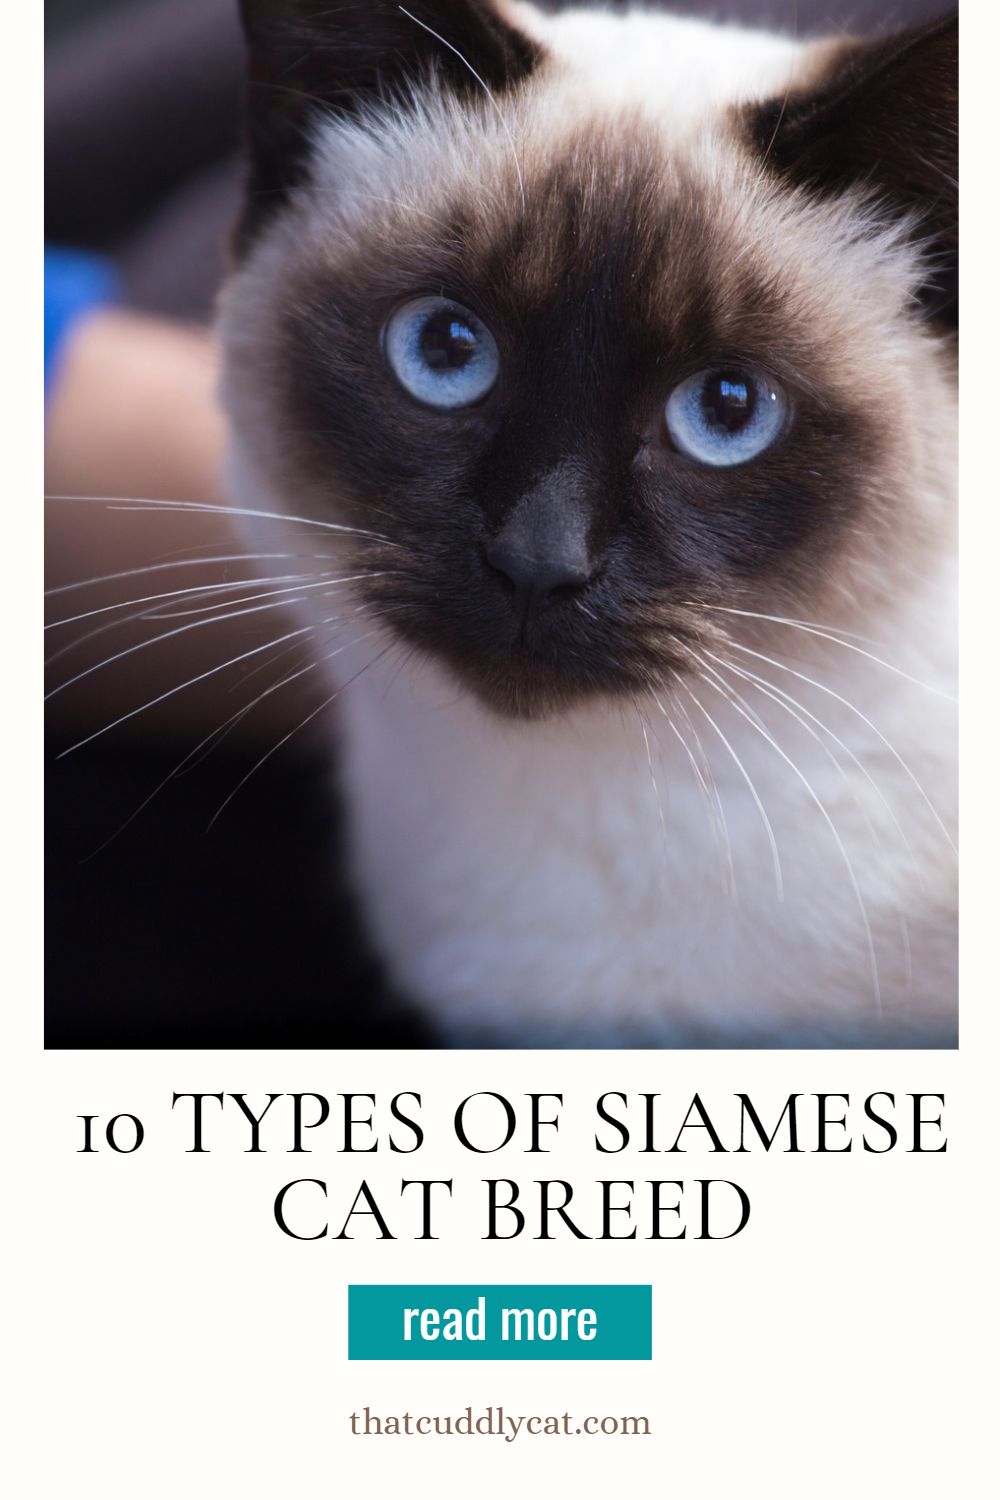 10 Types of Siamese Cat Breed